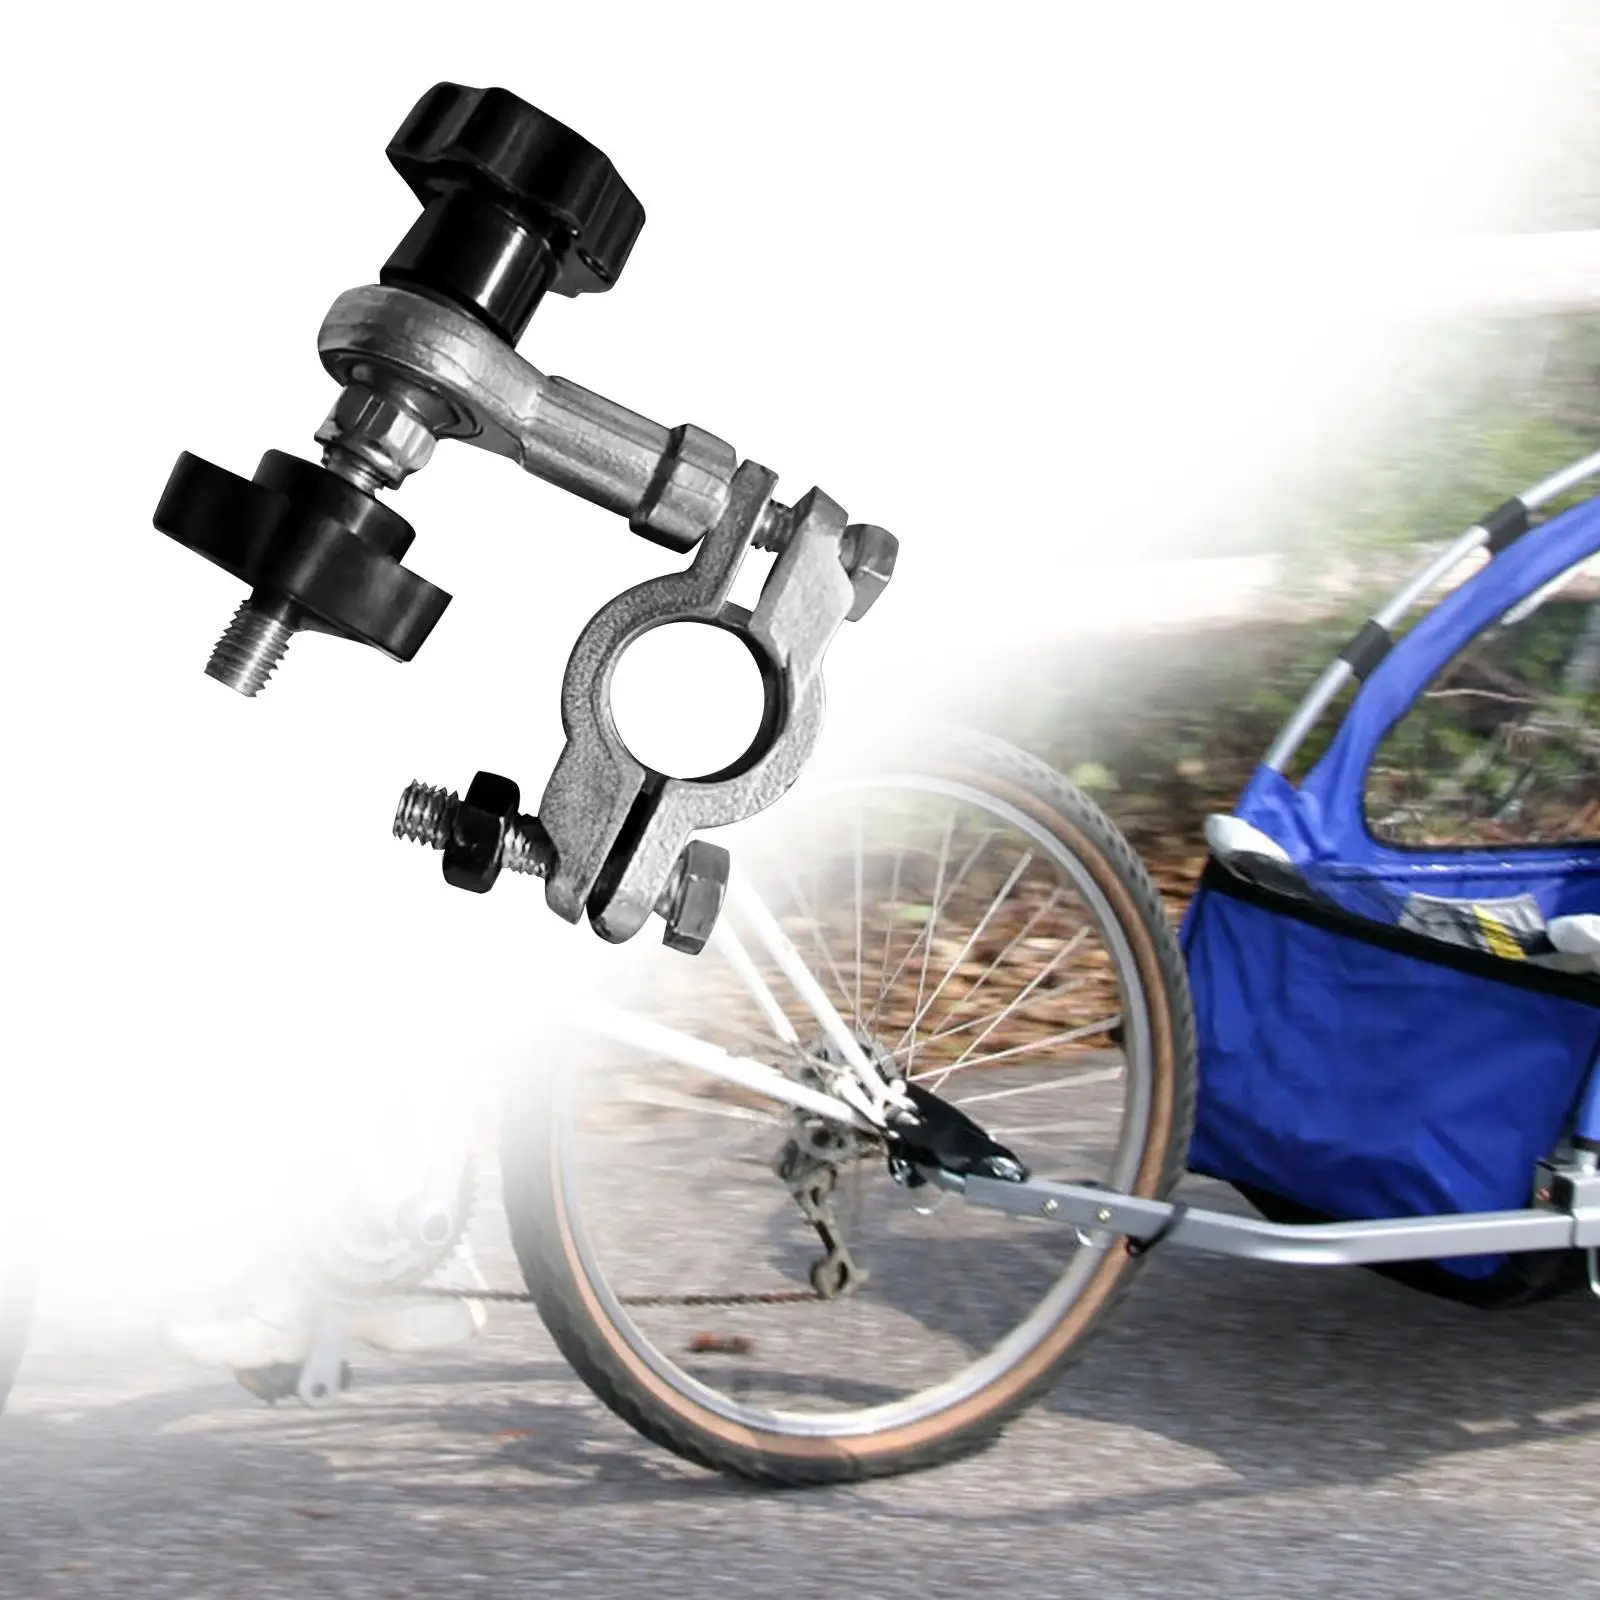 Linker Adapter between Camping Cart and Bike Cycling Adapter Professional Quick Release Replace Parts for Towing Solutions